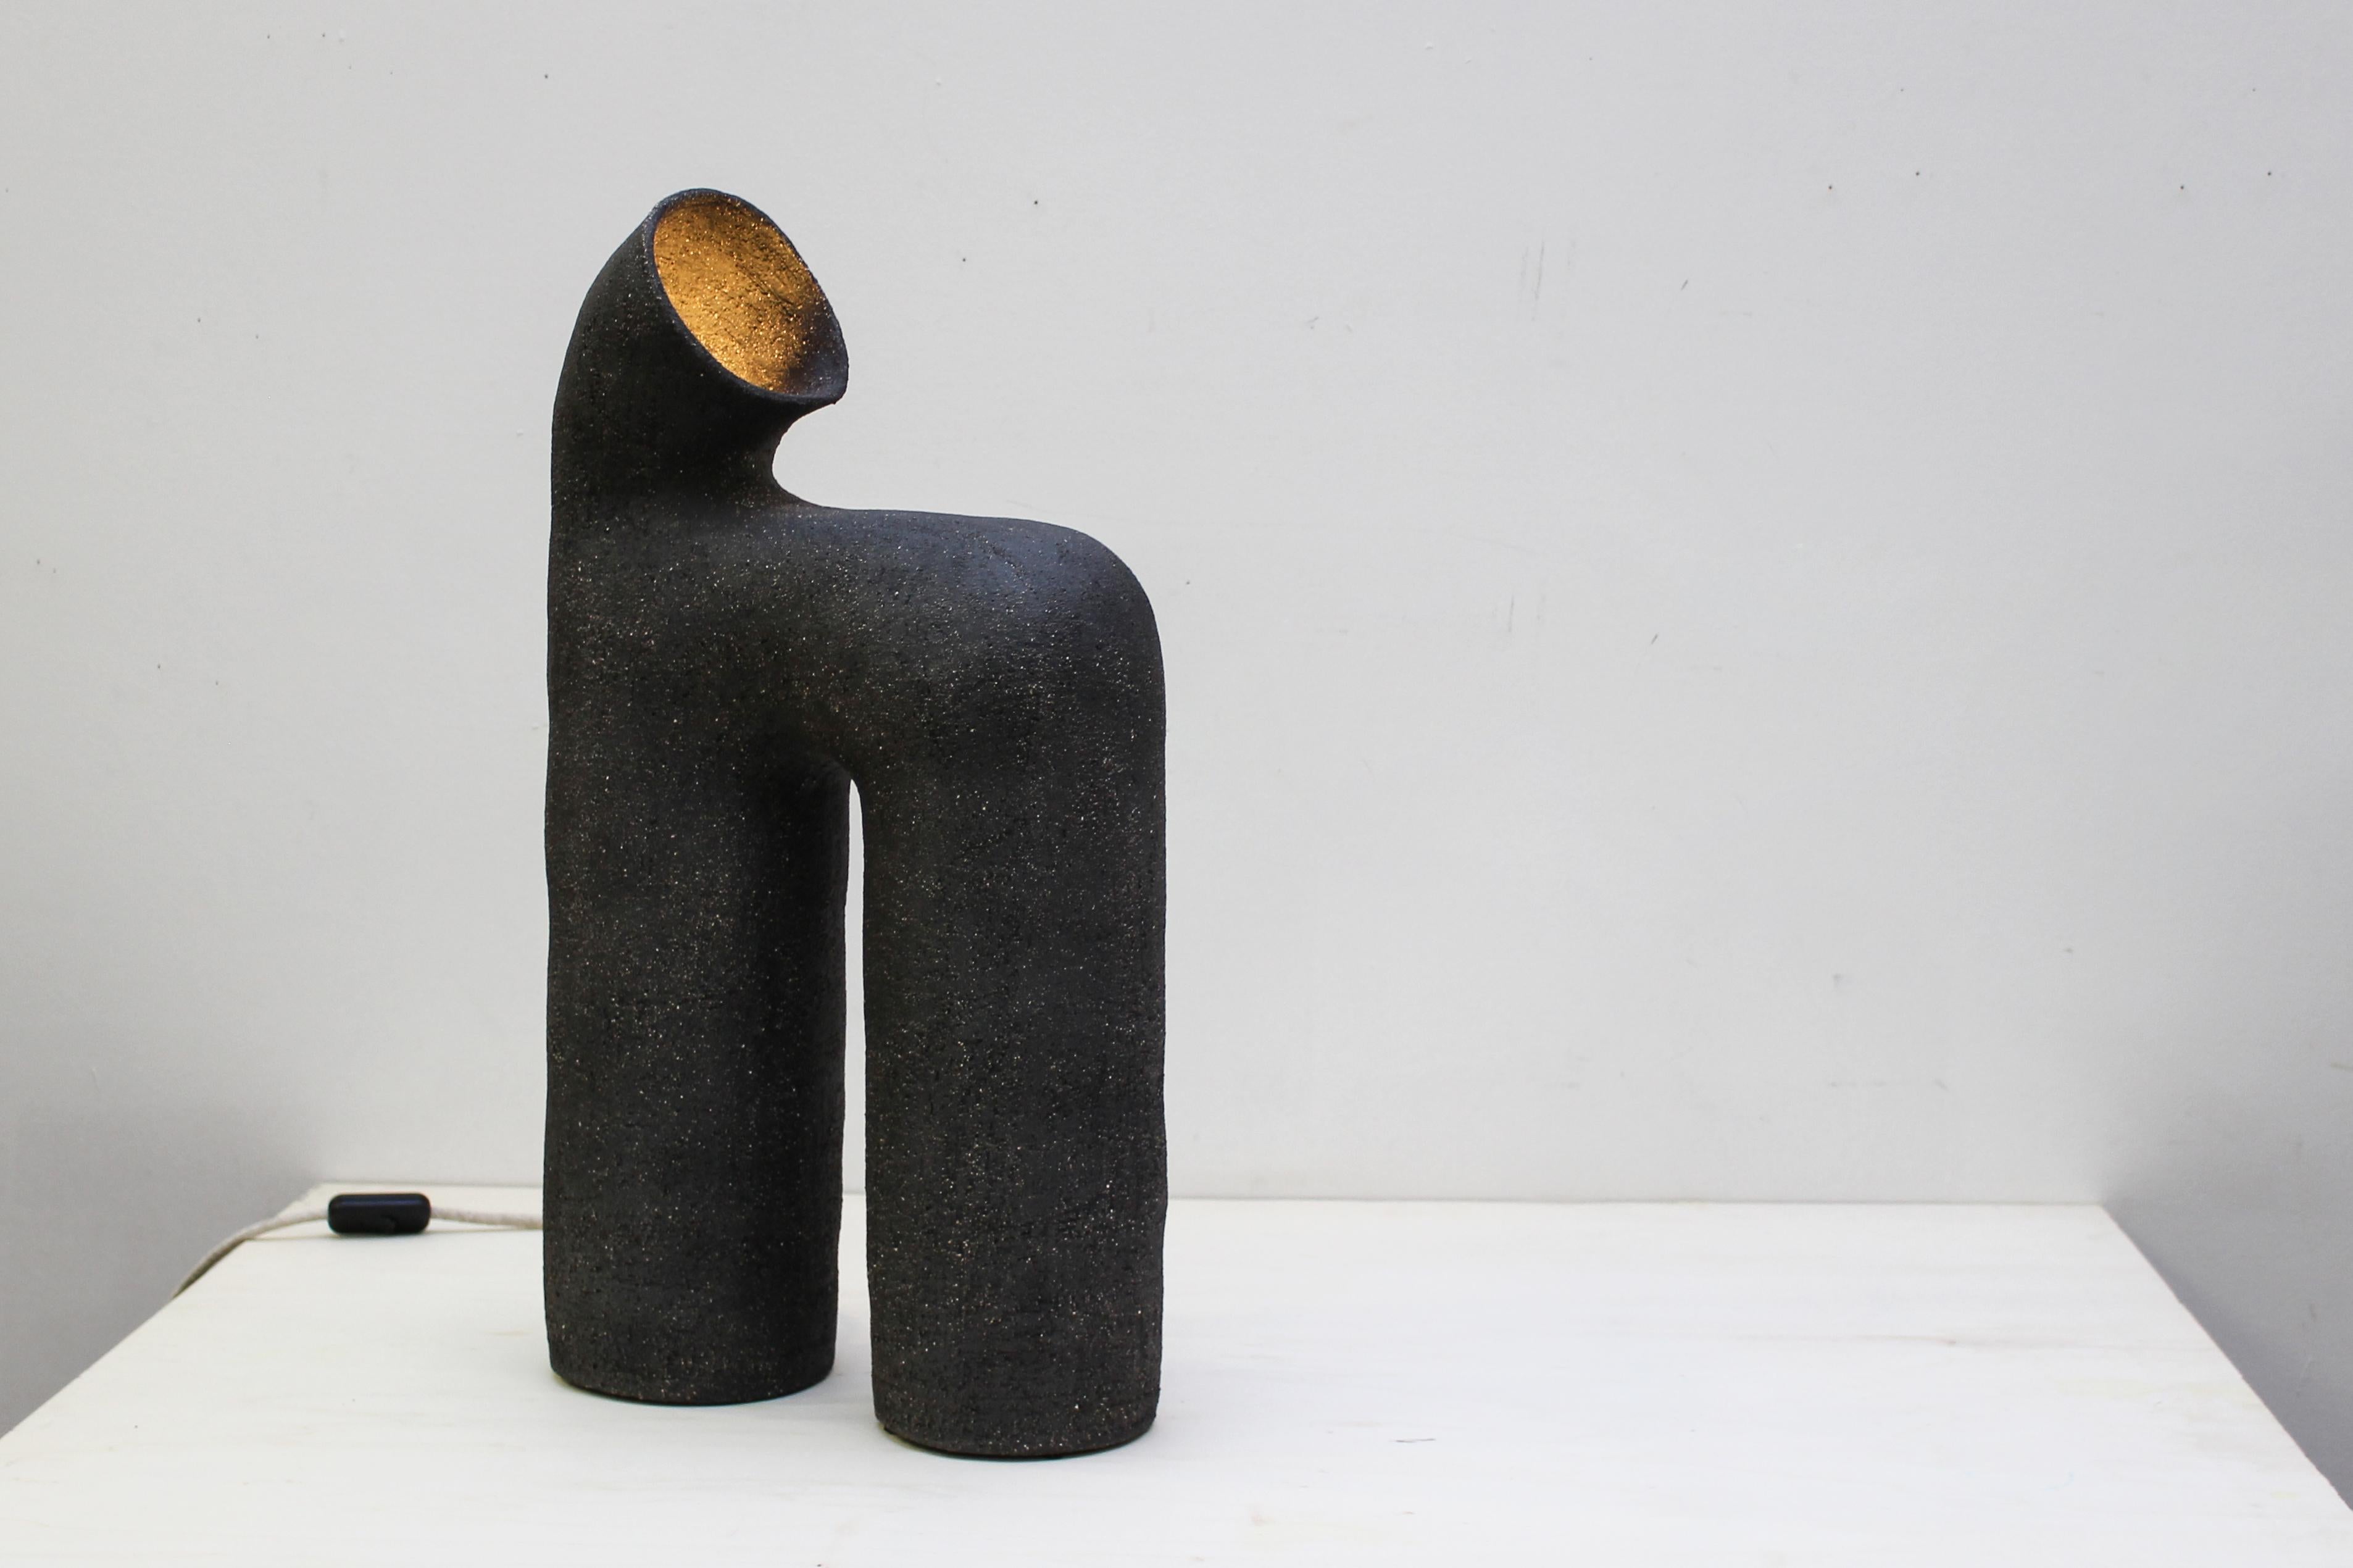 Refuge black stoneware table lamp by Elisa Uberti
Materials: Black stoneware
Dimensions: Around 55/60cm

After fifteen years in fashion, Elisa Uberti decides to take the time to work with these hands and to give birth to new